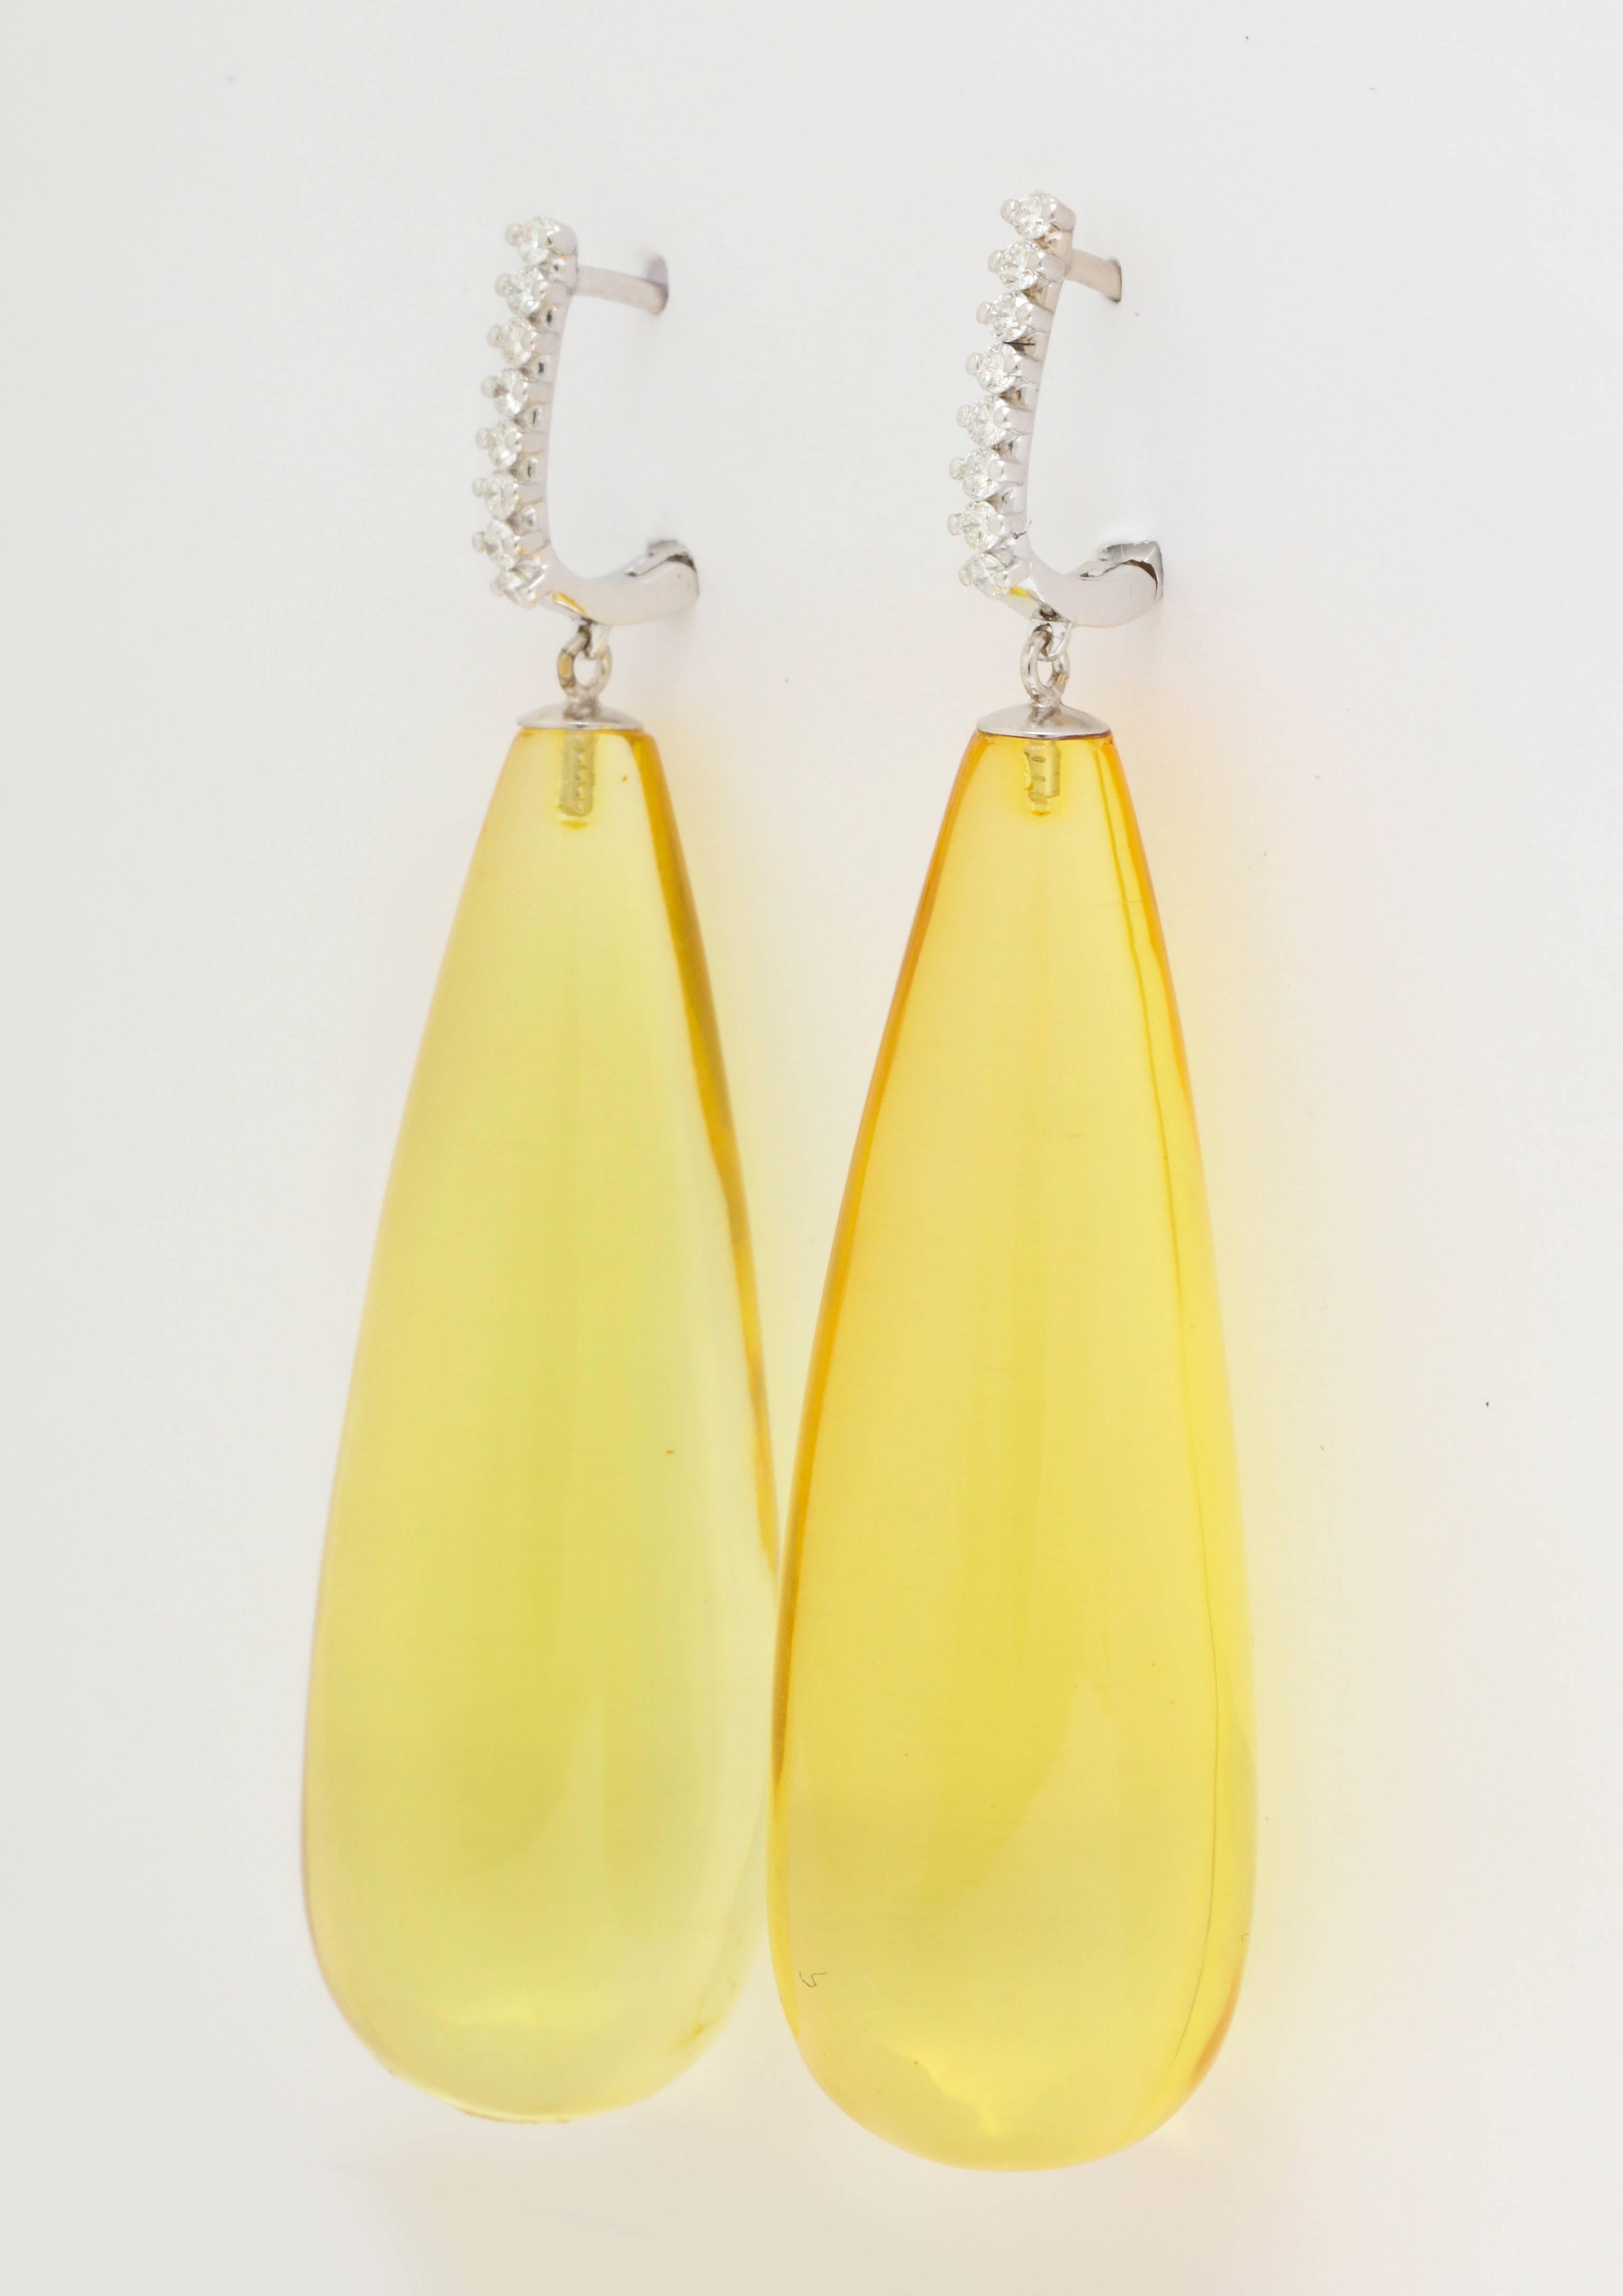 Weighing in at a feather light 1/2  ounce, these 2 1/2 inch long earrings are sure to impress, while being an absolute pleasure to wear.  The bright, lemon yellow amber drops are like bursts of sunshine, and the diamond tops add just the right touch